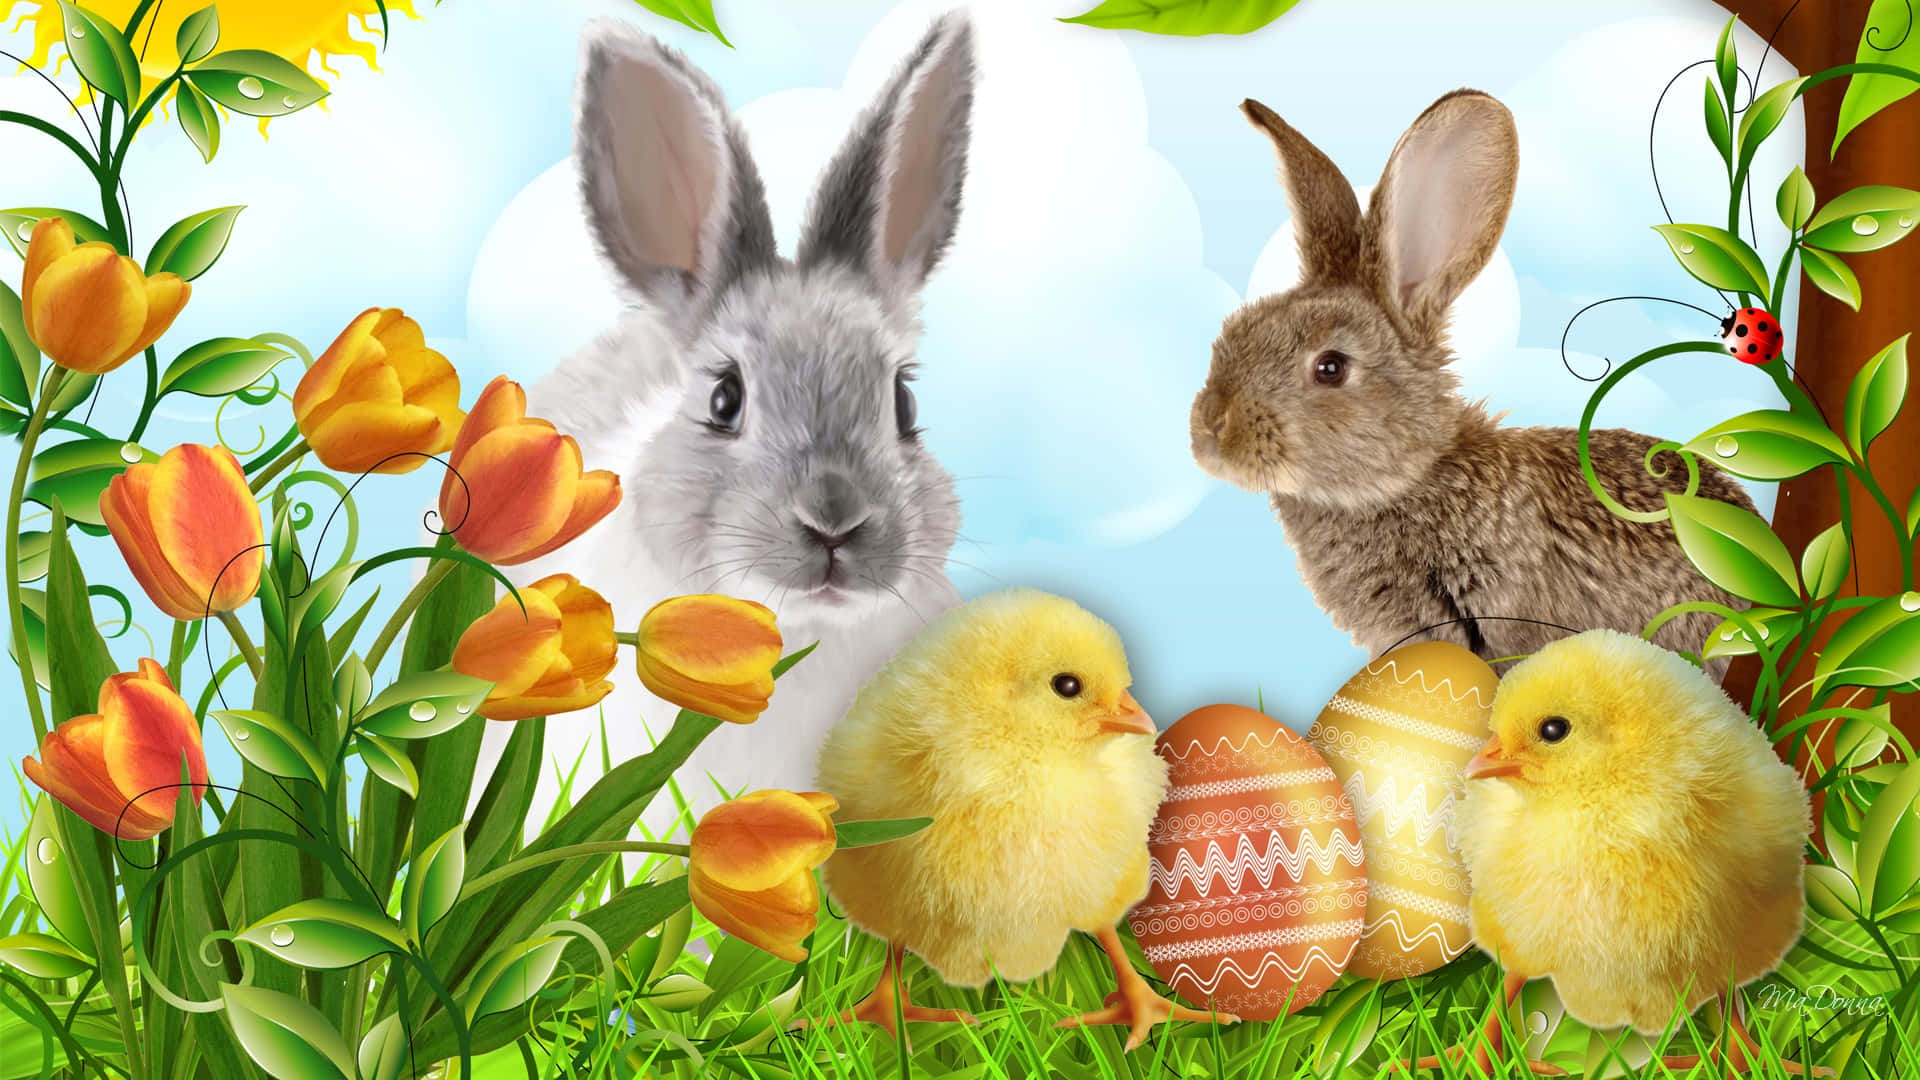 Celebrate Easter with a Cute and Happy Visage Wallpaper